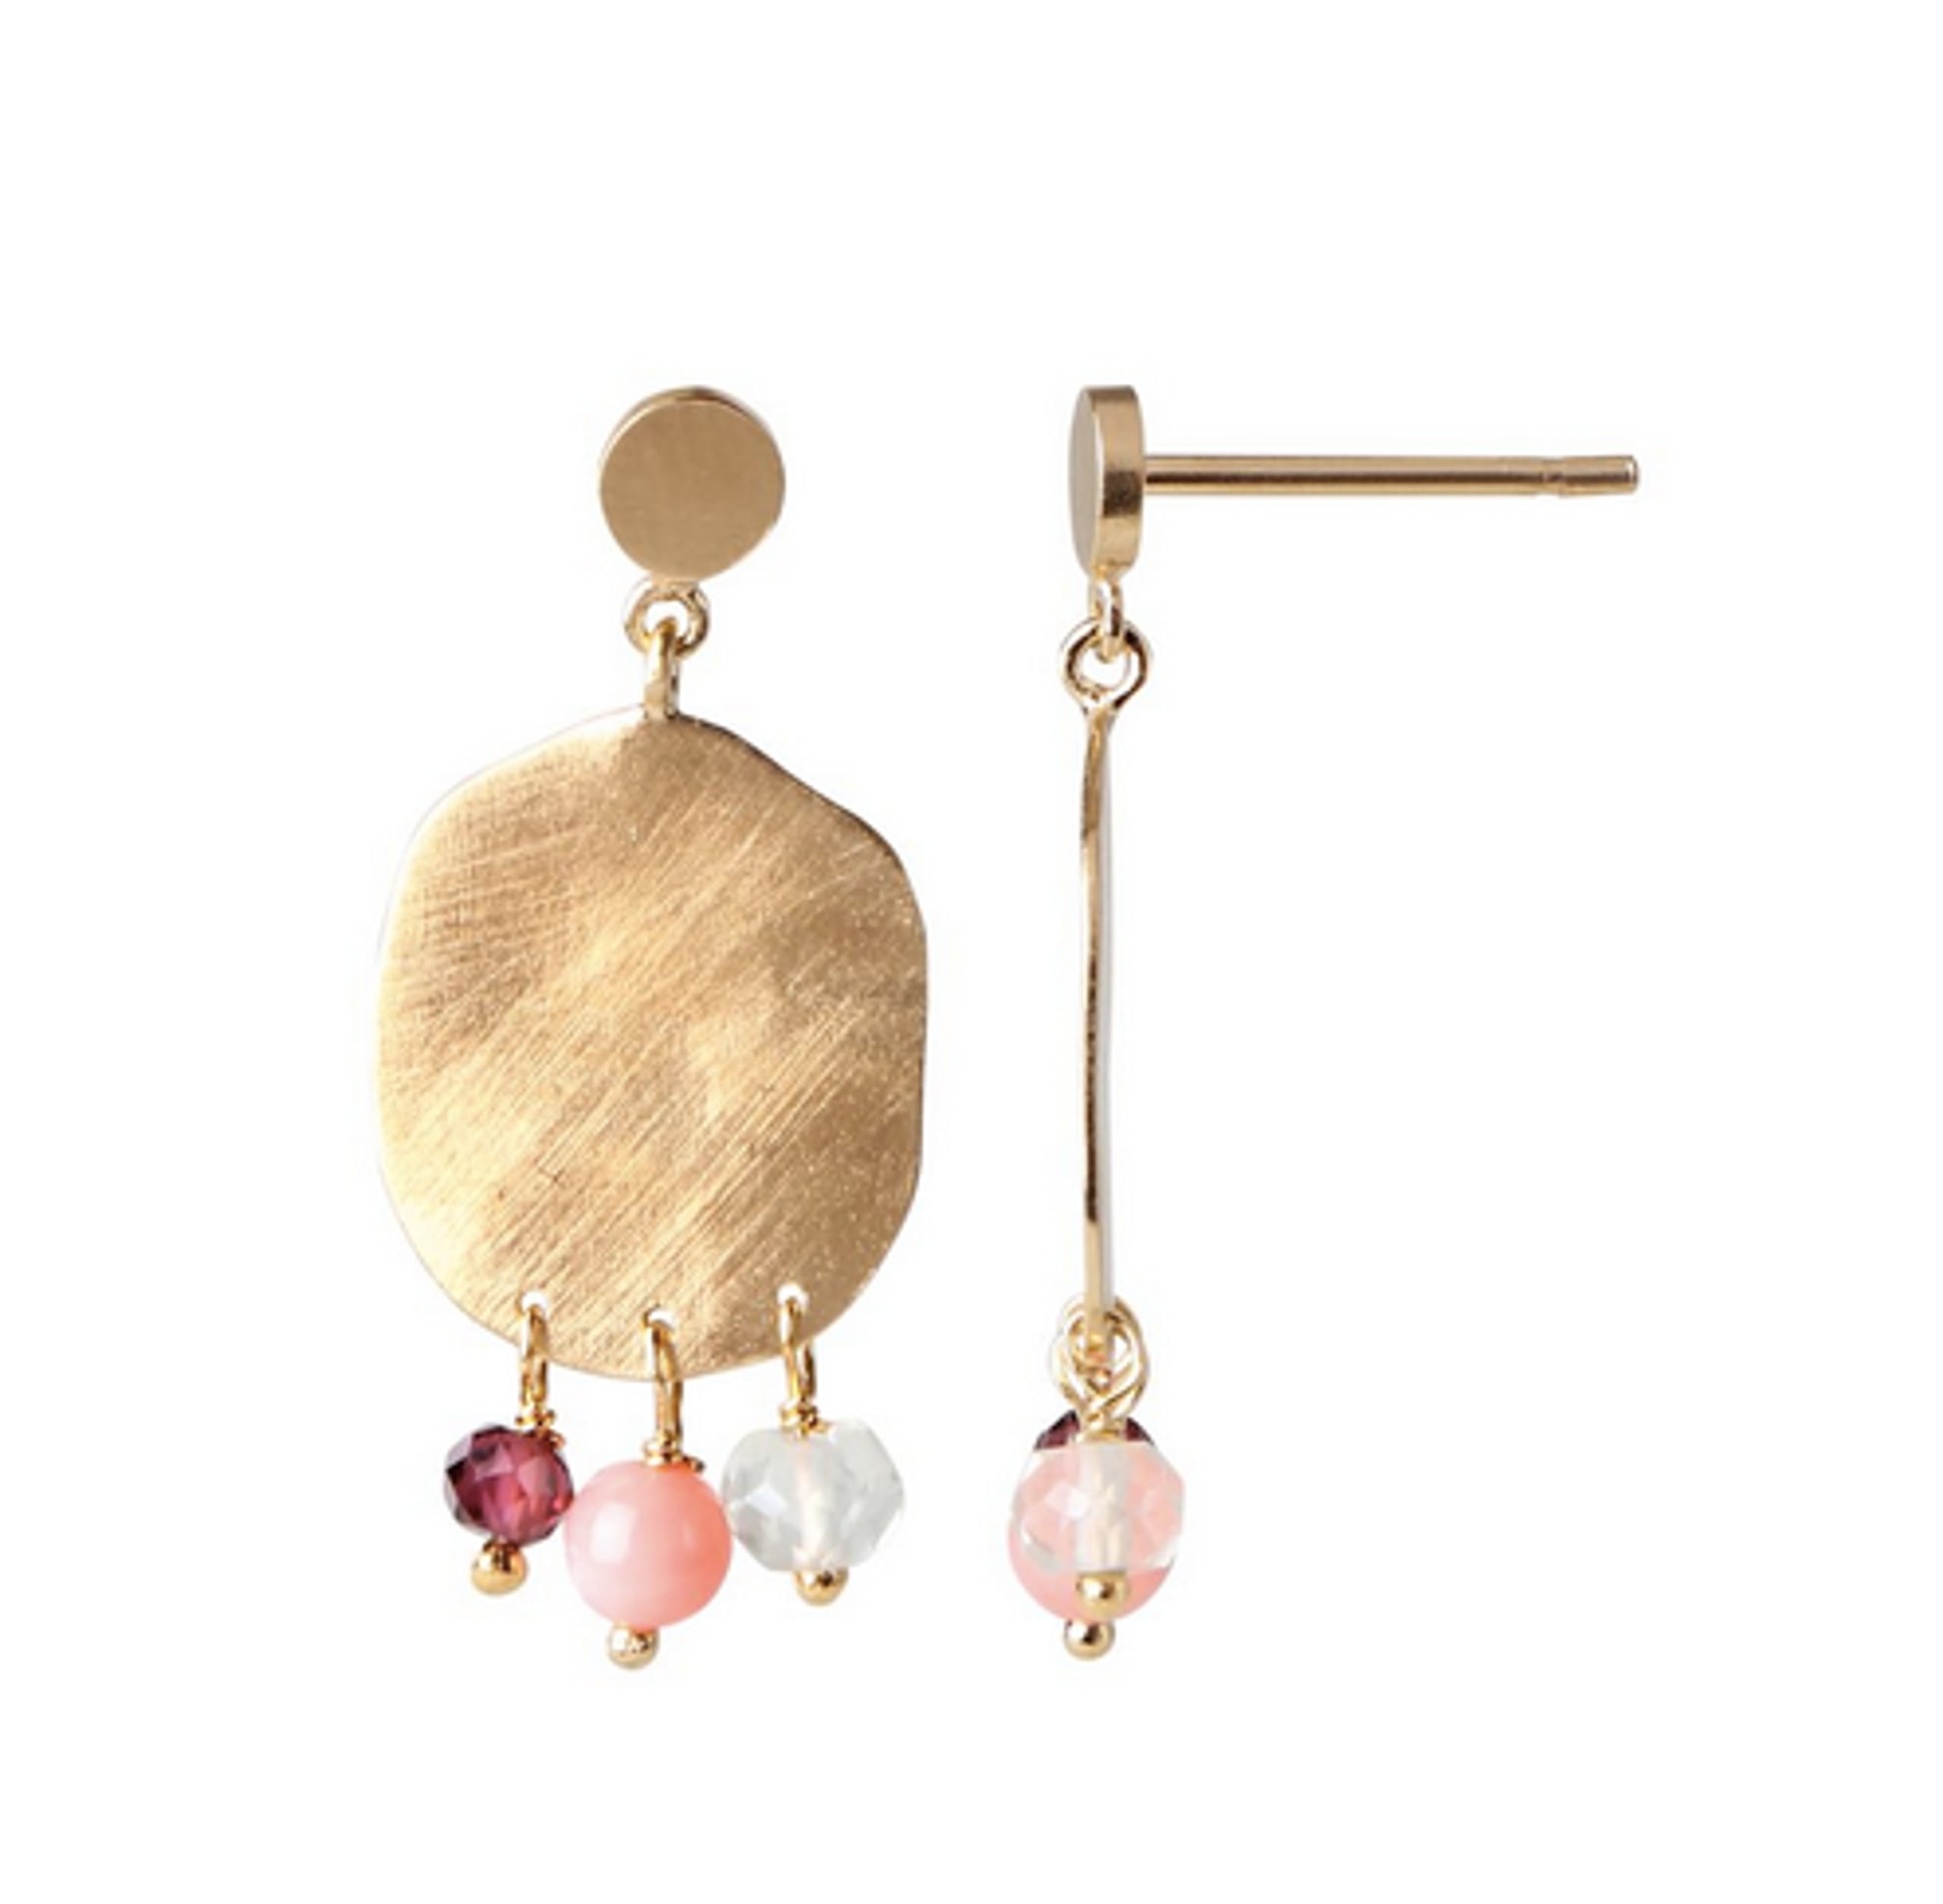 Hammered and Gemstone Earring Oorbellen - Stine A